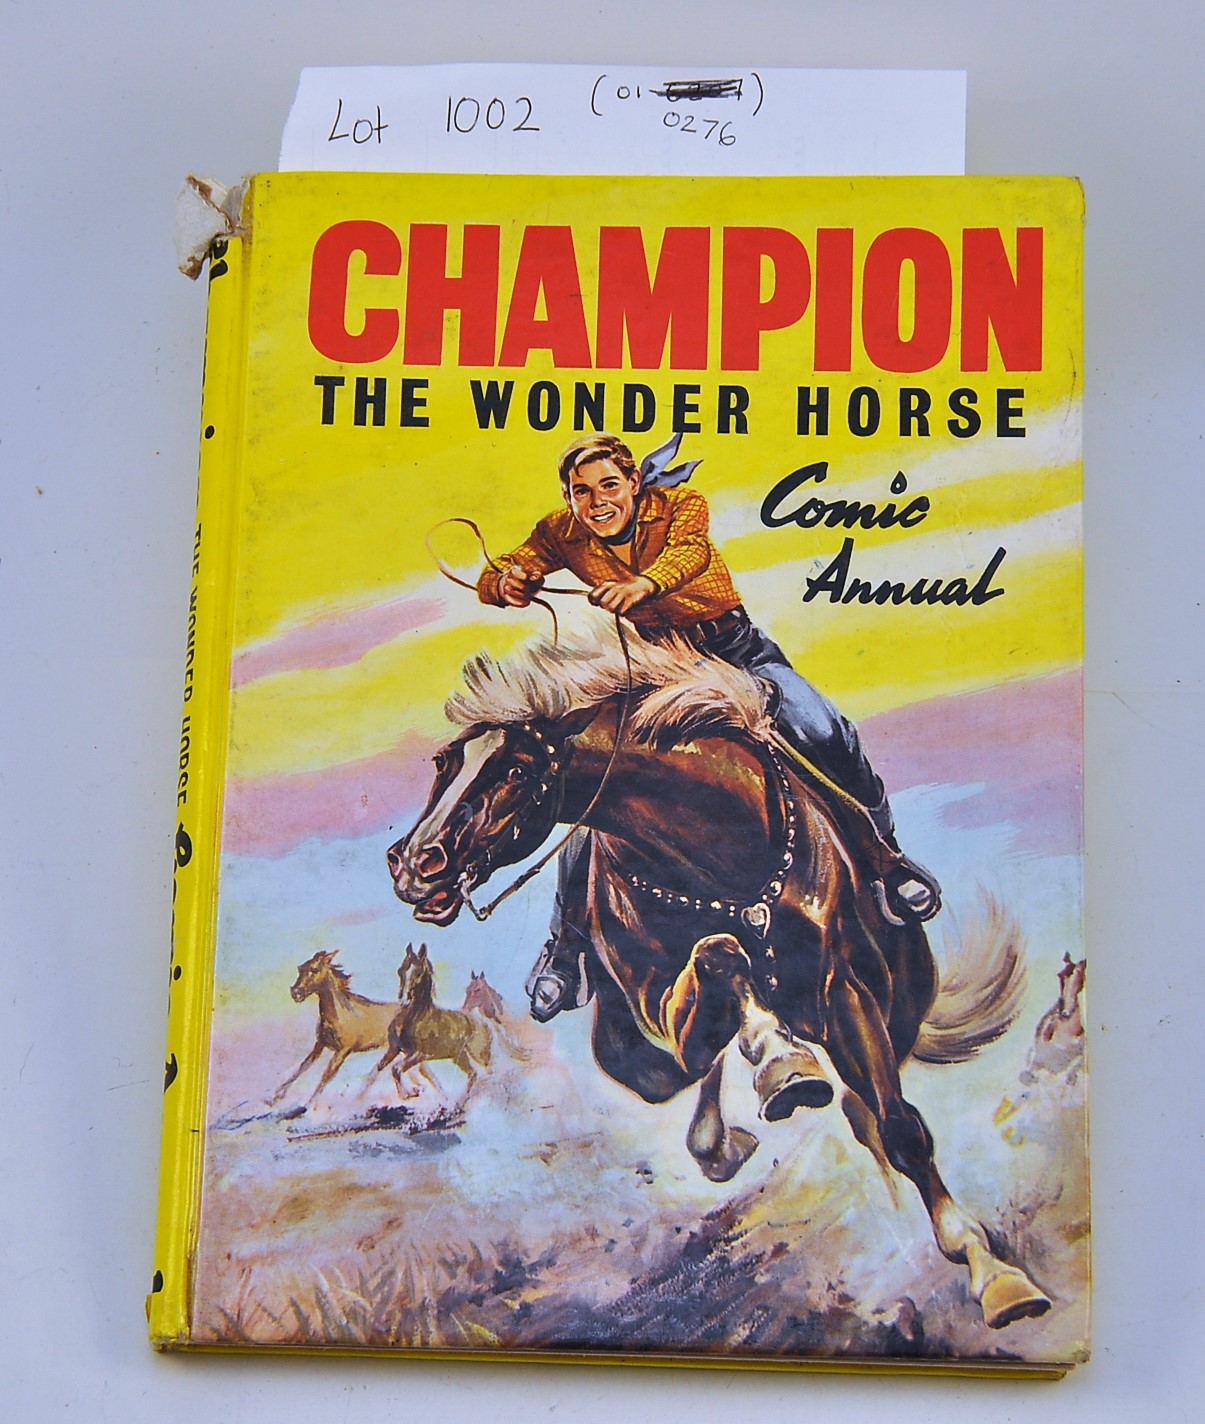 CHAMPION THE WONDER HORSE COMIC ANNUAL SOME LOOSE AND UNATTACHED PAGES PEN MARKS ON PAGE 93 F.